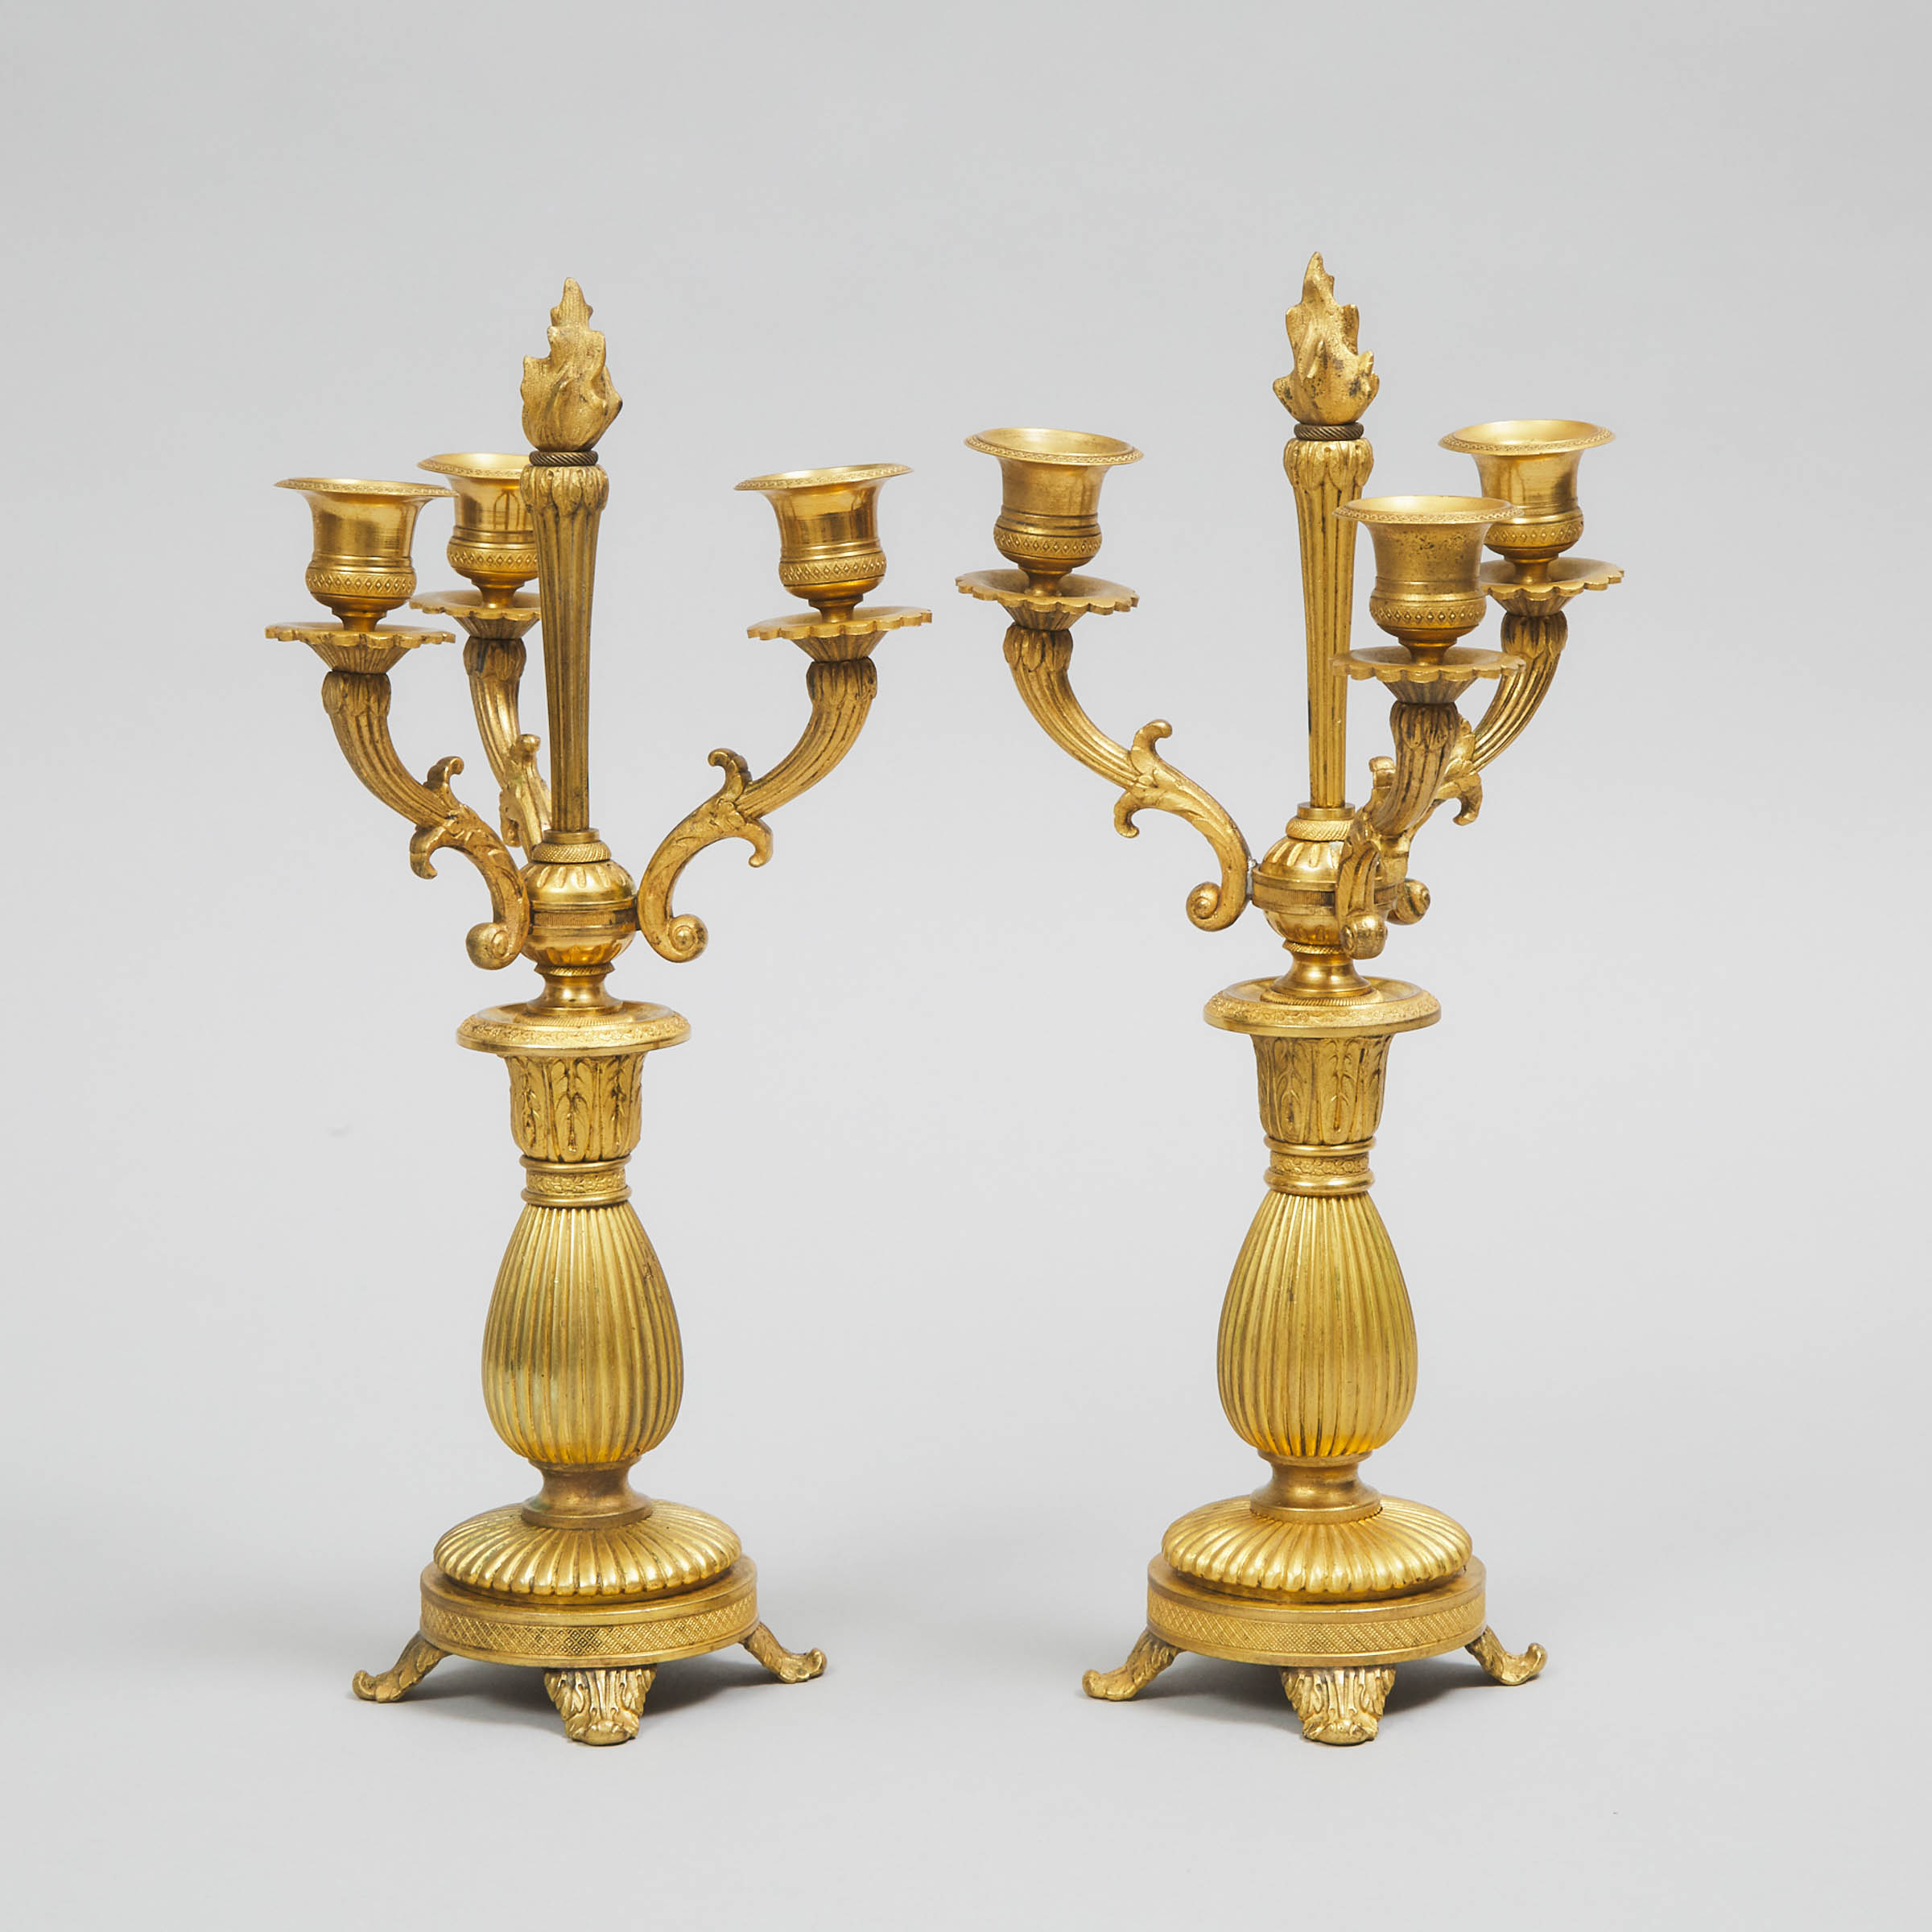 Pair of French Empire Style GIlt Bronze Three Light Candelabra, 19th/early 20th century